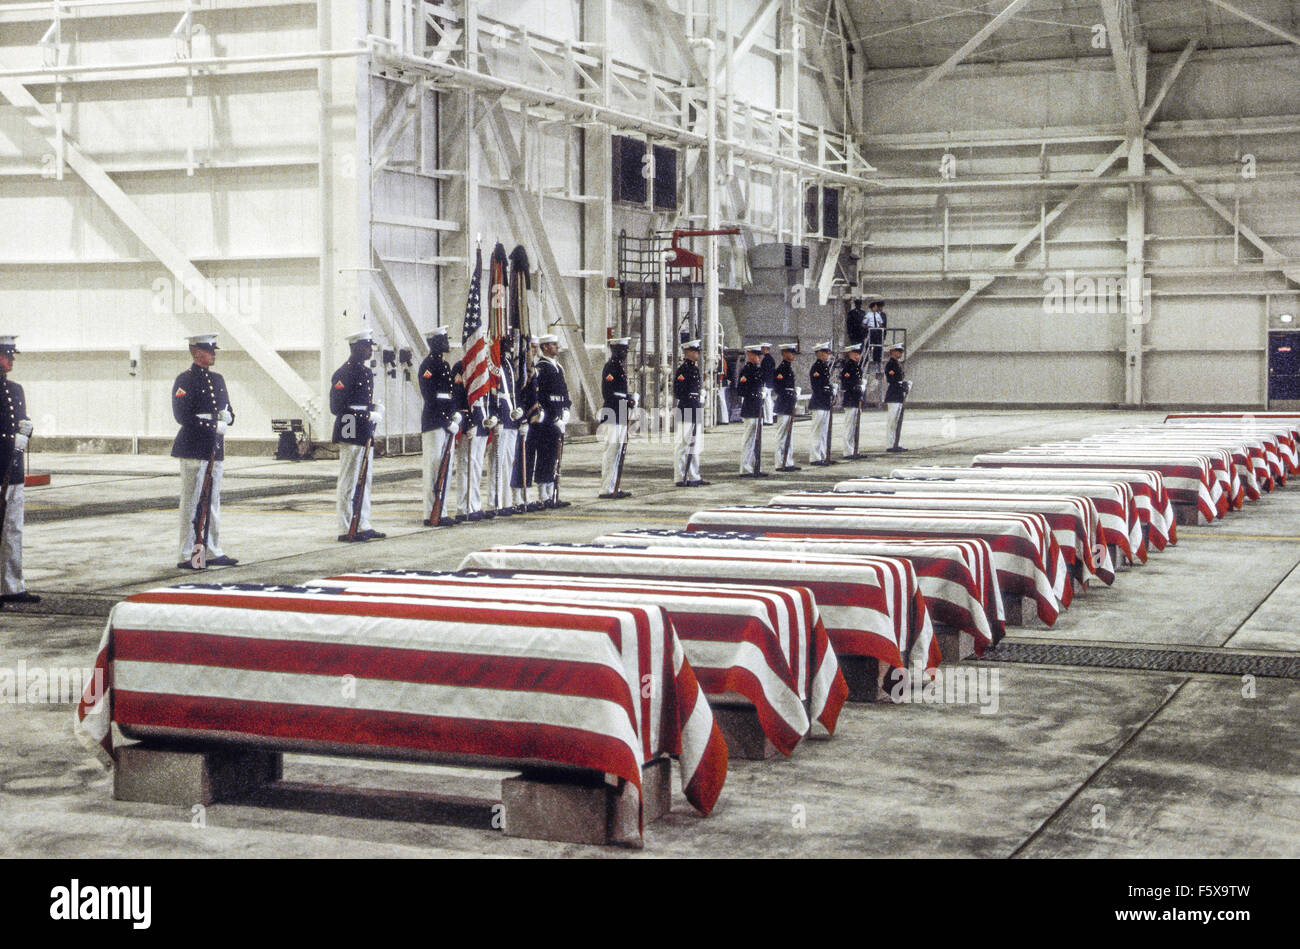 Dover Air Force Base, Delaware, USA 29th October 1983 At precisely 7 A.M., a Marine honor guard and a color guard in ceremonial dress uniforms marched into a huge hangar at the Dover Air Force Base and stood facing 16 coffins. Behind them, suspended from the beams of the hangar, was a 38-foot American flag. The ceremony was the first on American soil honoring servicemen killed in the bombing in Beirut and the invasion of Grenada. Credit: Mark Reinstein Stock Photo